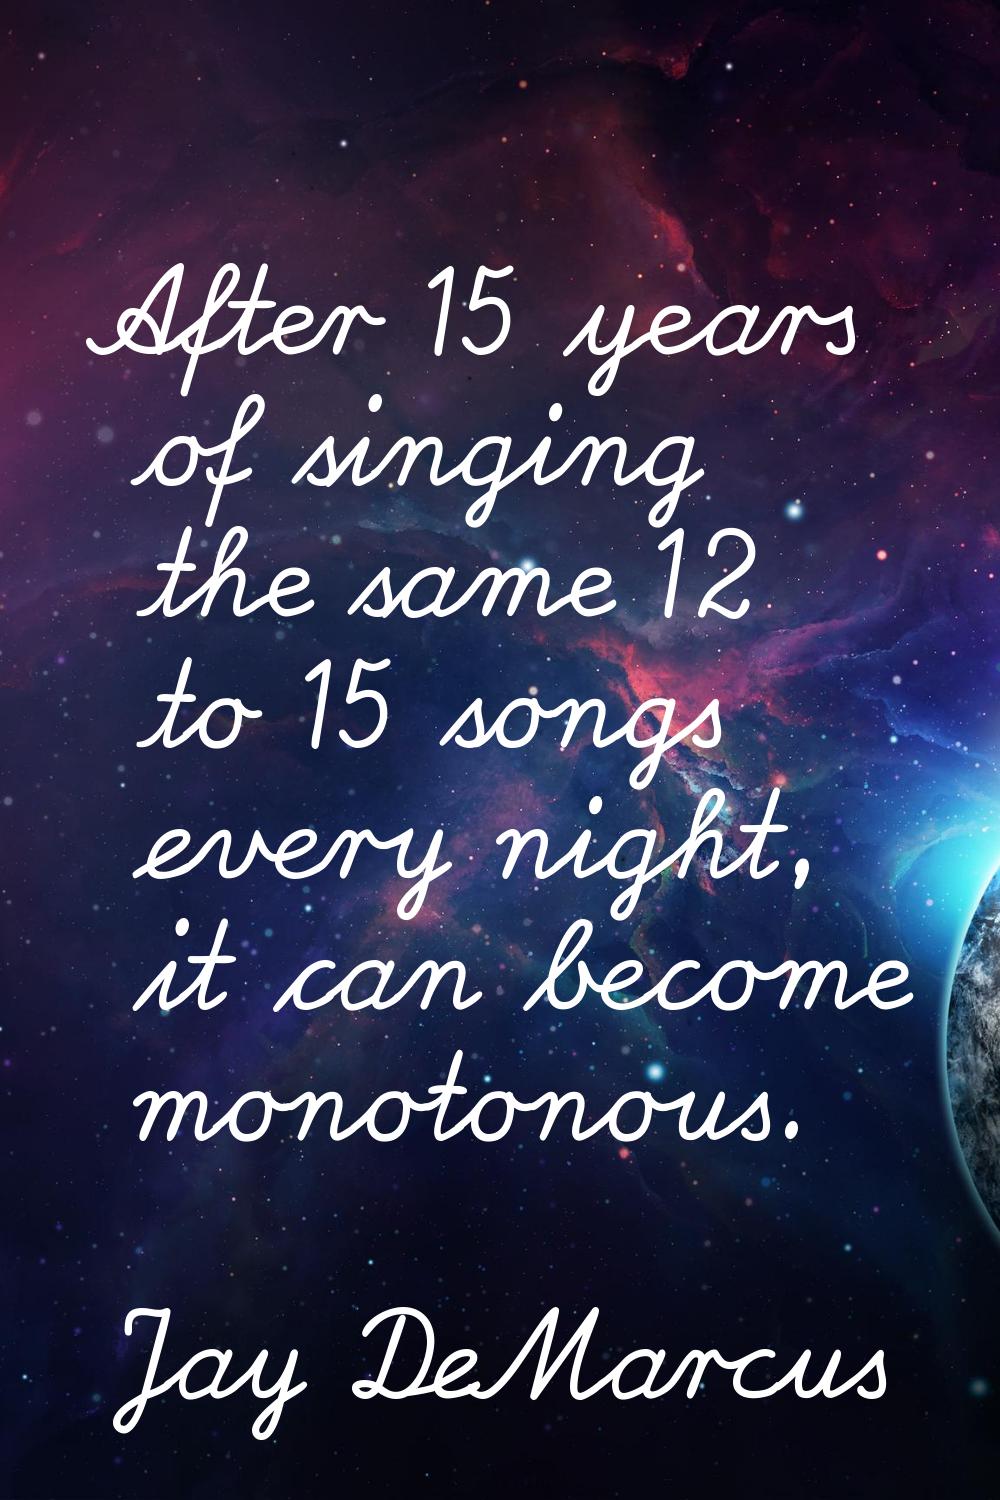 After 15 years of singing the same 12 to 15 songs every night, it can become monotonous.